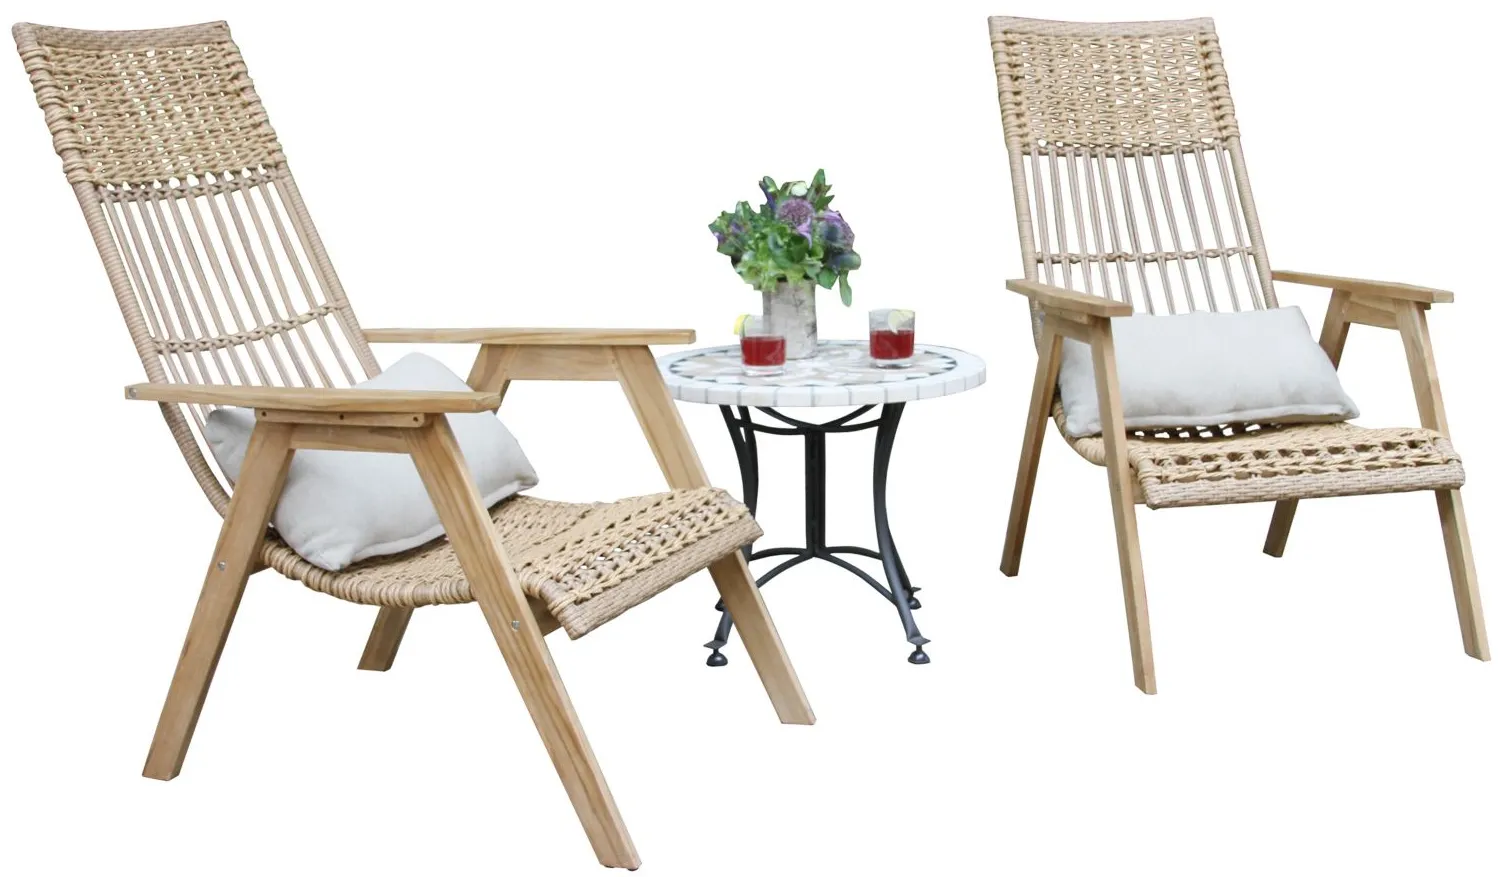 Bohemian 3-pc. Lounger Set with Marble Accent Table in Teak by Outdoor Interiors